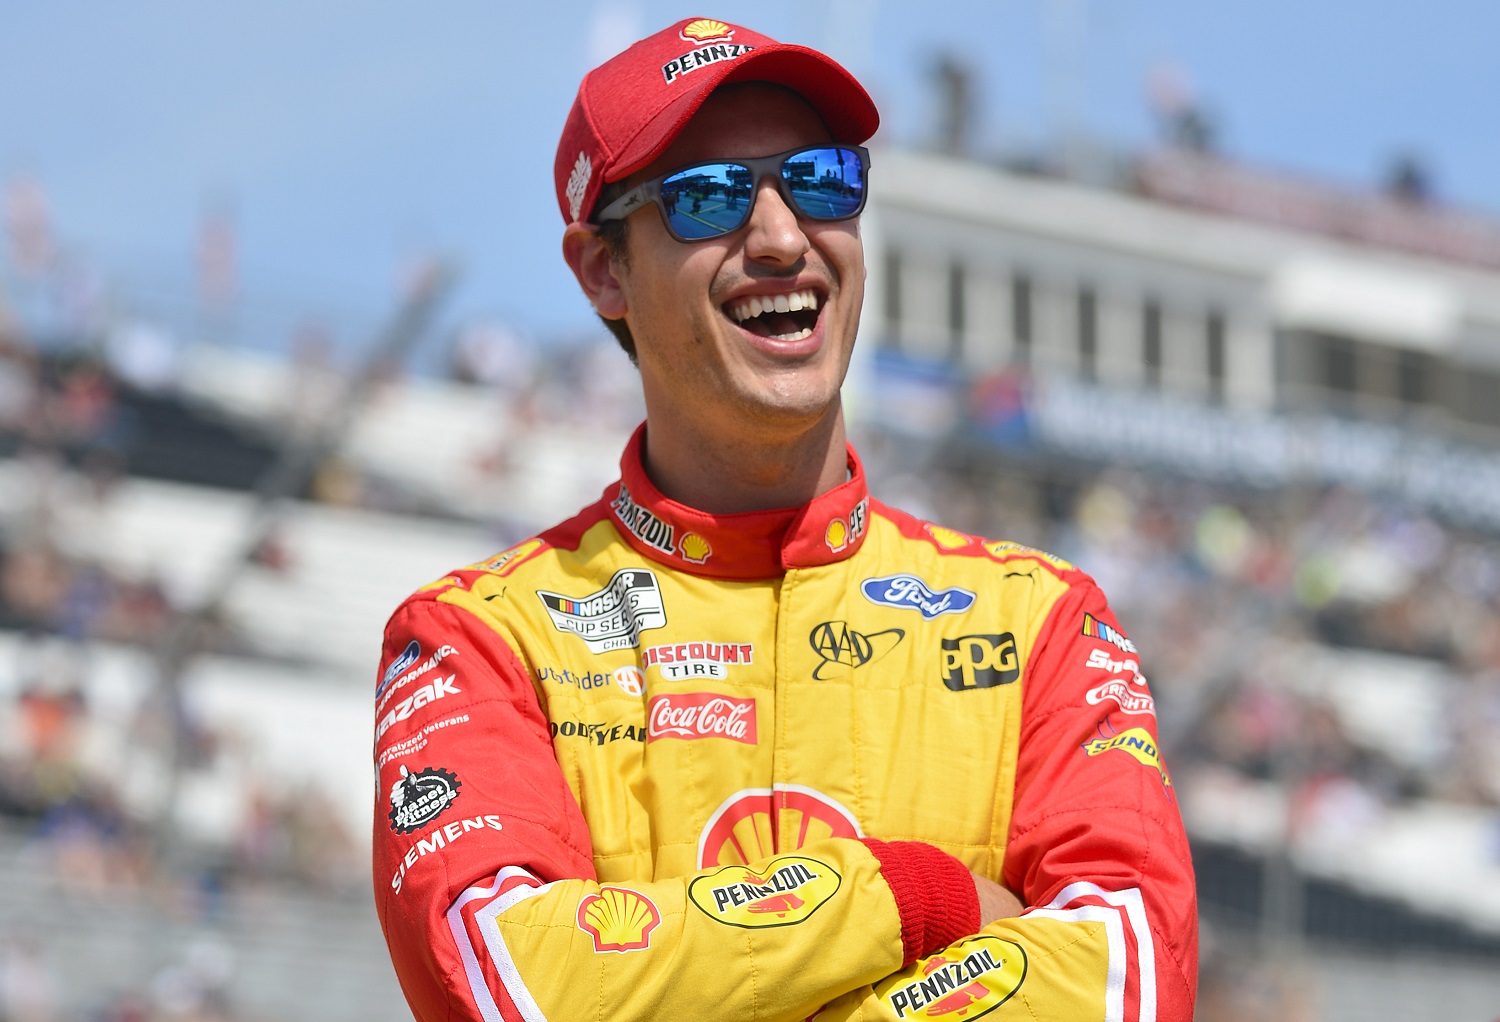 Joey Logano laughs on the grid during qualifying for the NASCAR Cup Series Enjoy Illinois 300 at WWT Raceway on June 4, 2022 in Madison, Illinois. | Jeff Curry/Getty Images